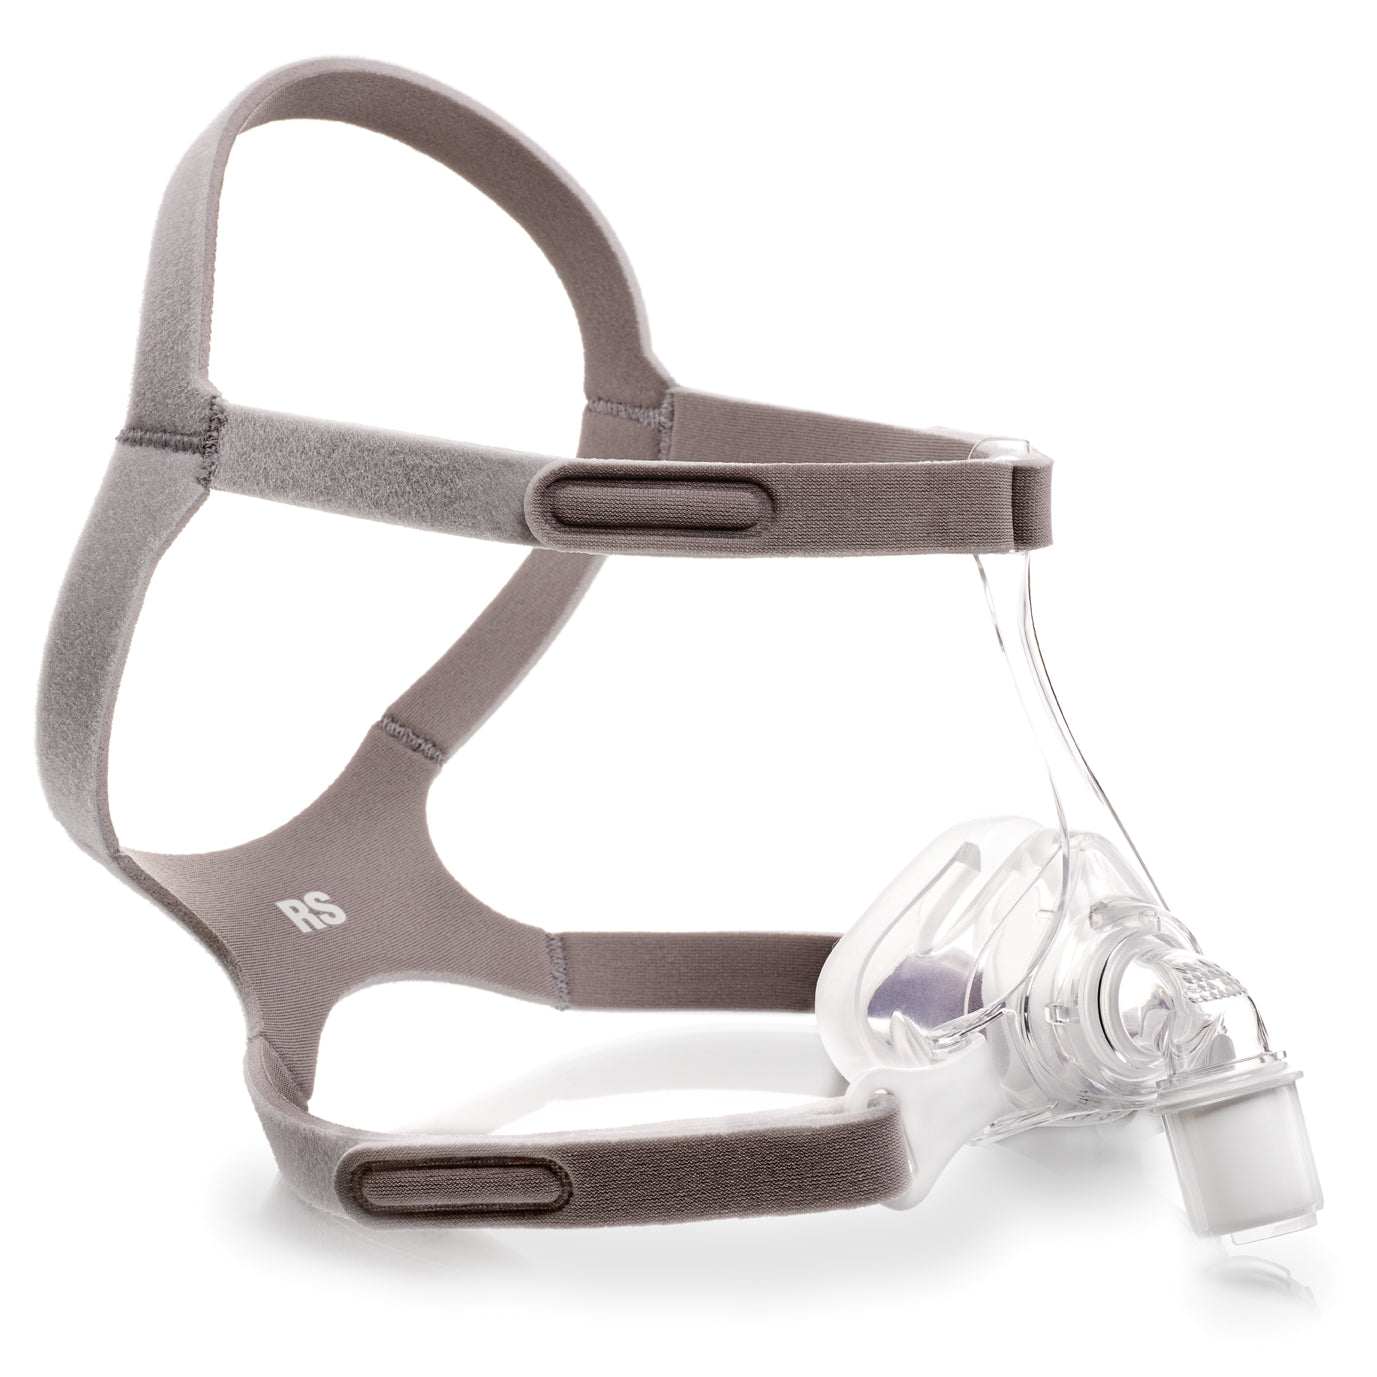 Respironics Pico Nasal Complete System with Headgear